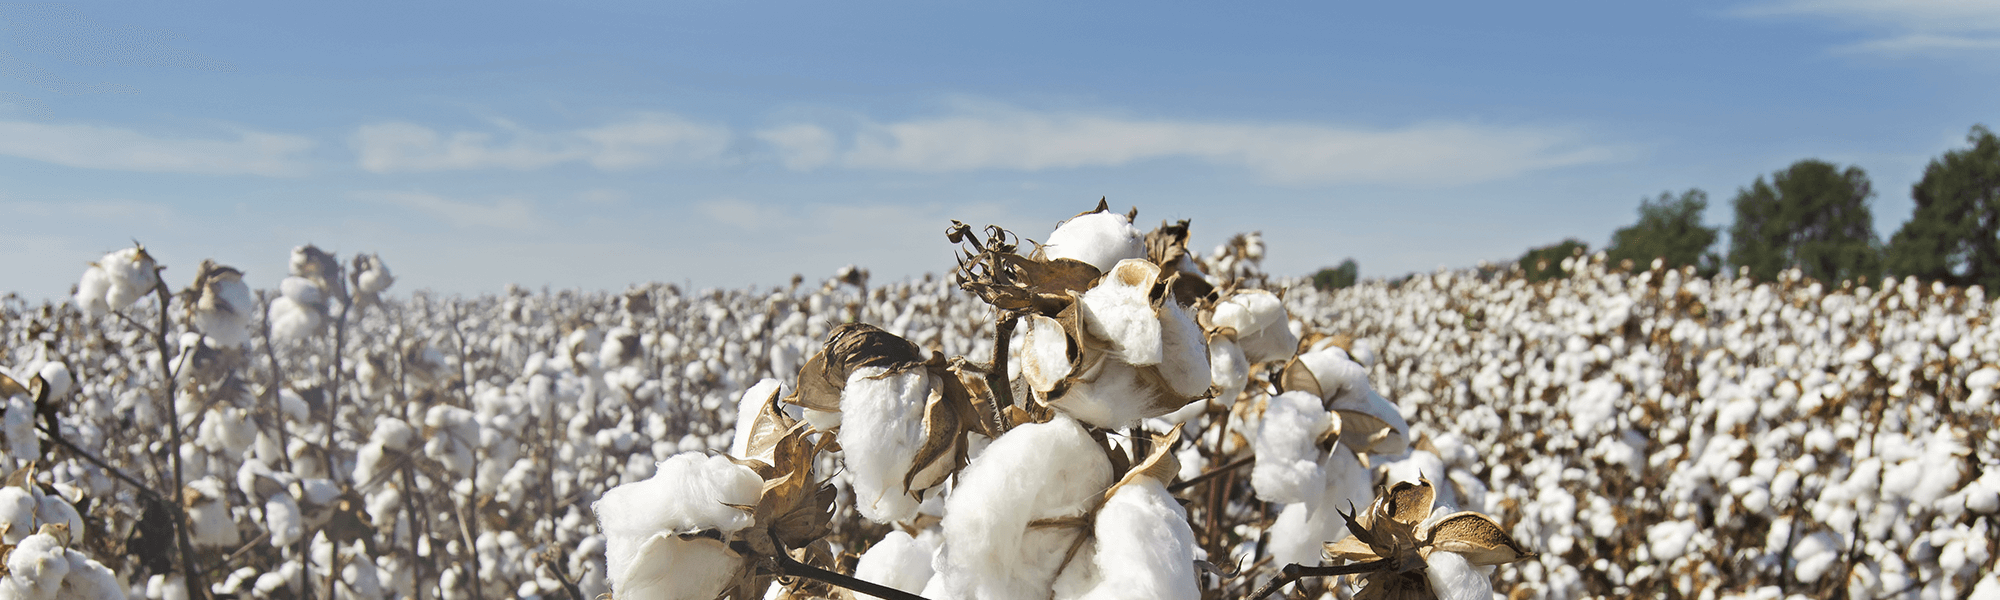 Photograph of Cotton Field